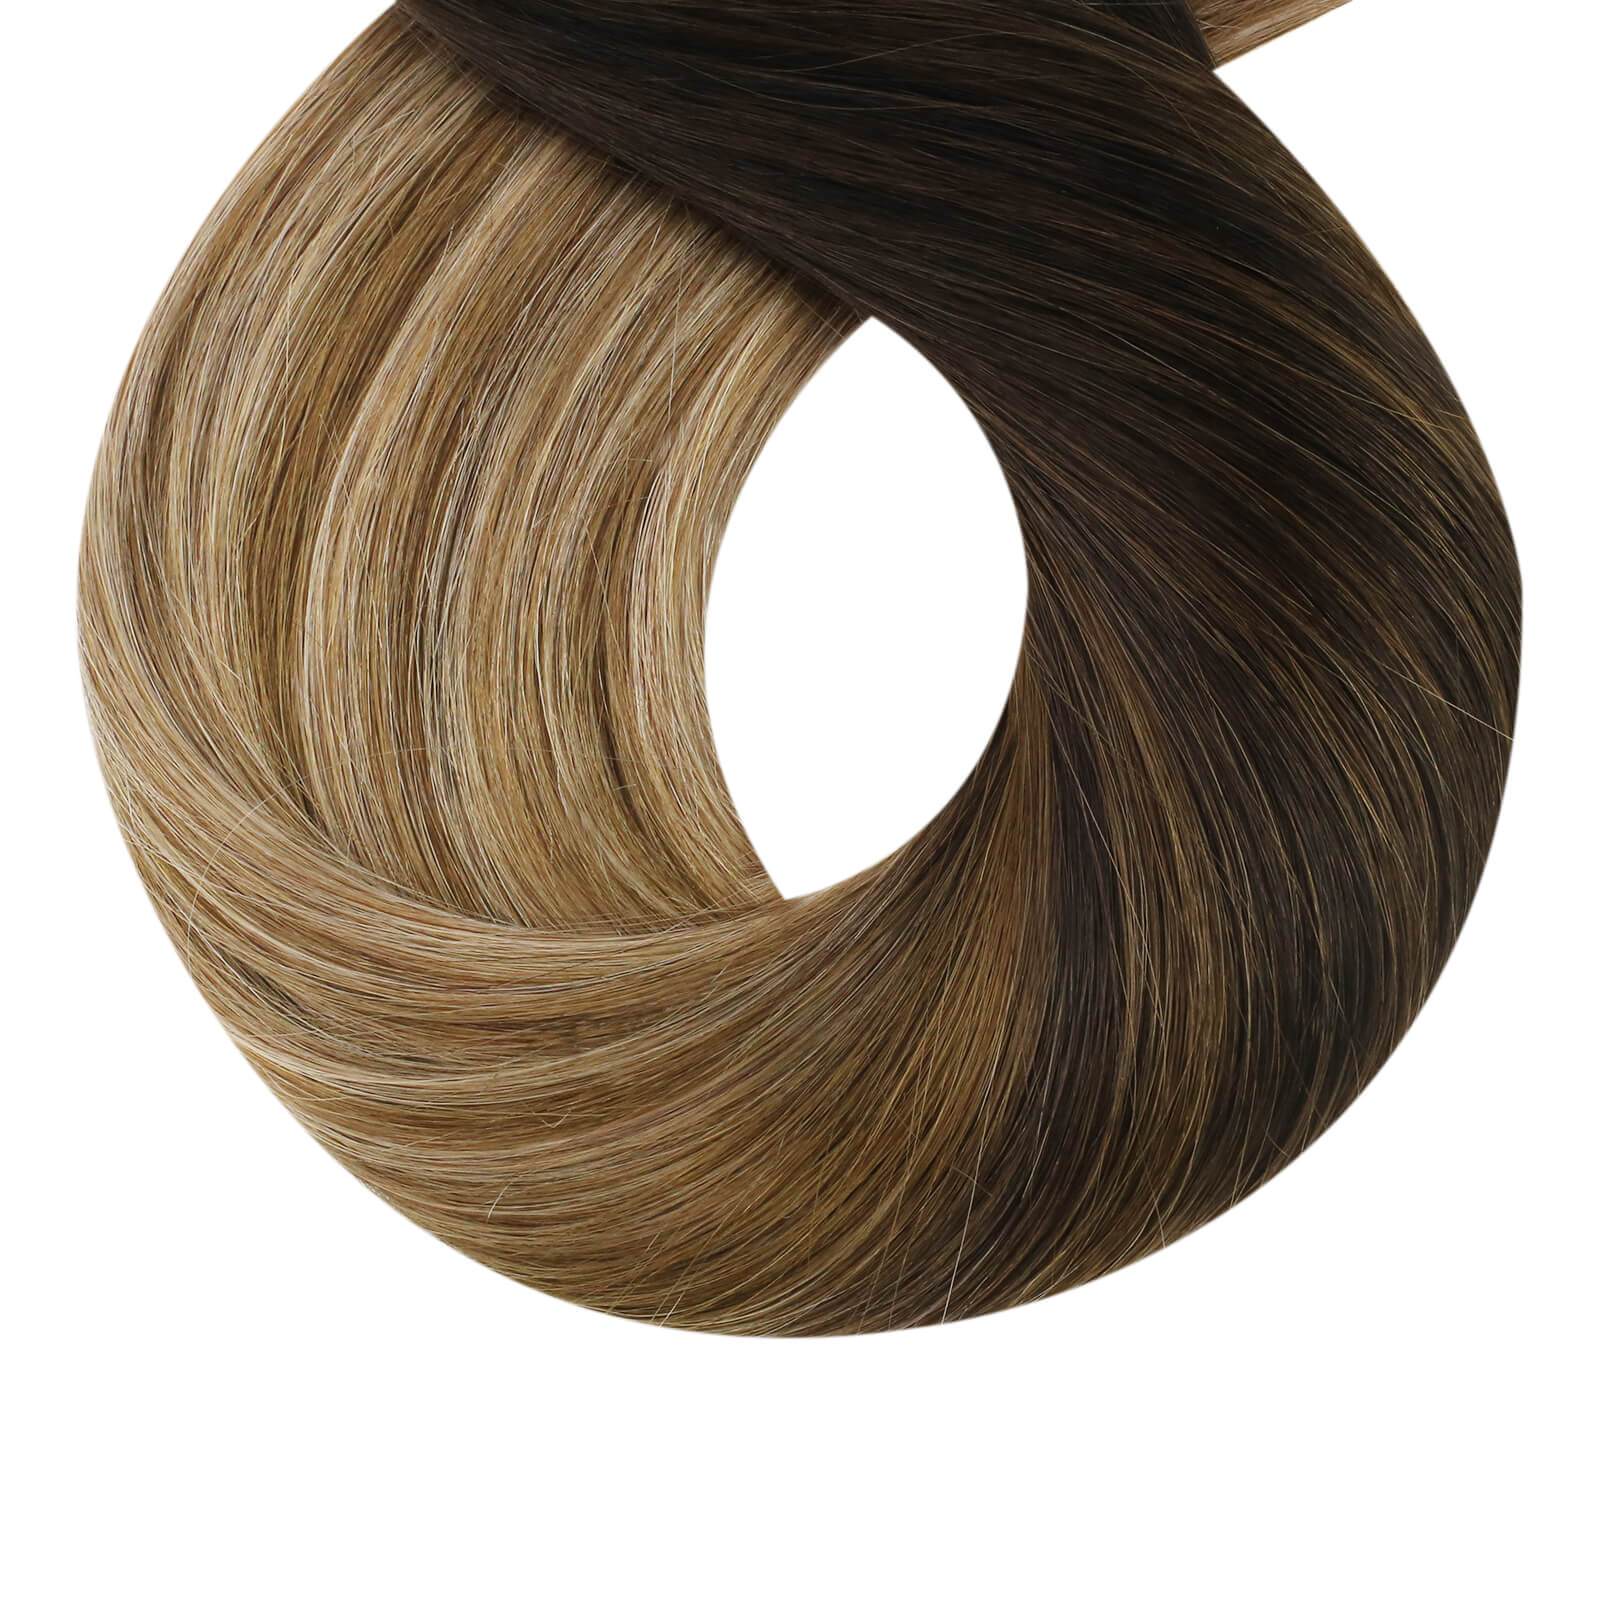 Virgin balayage ombre tape in hair extensions remy hair extensions